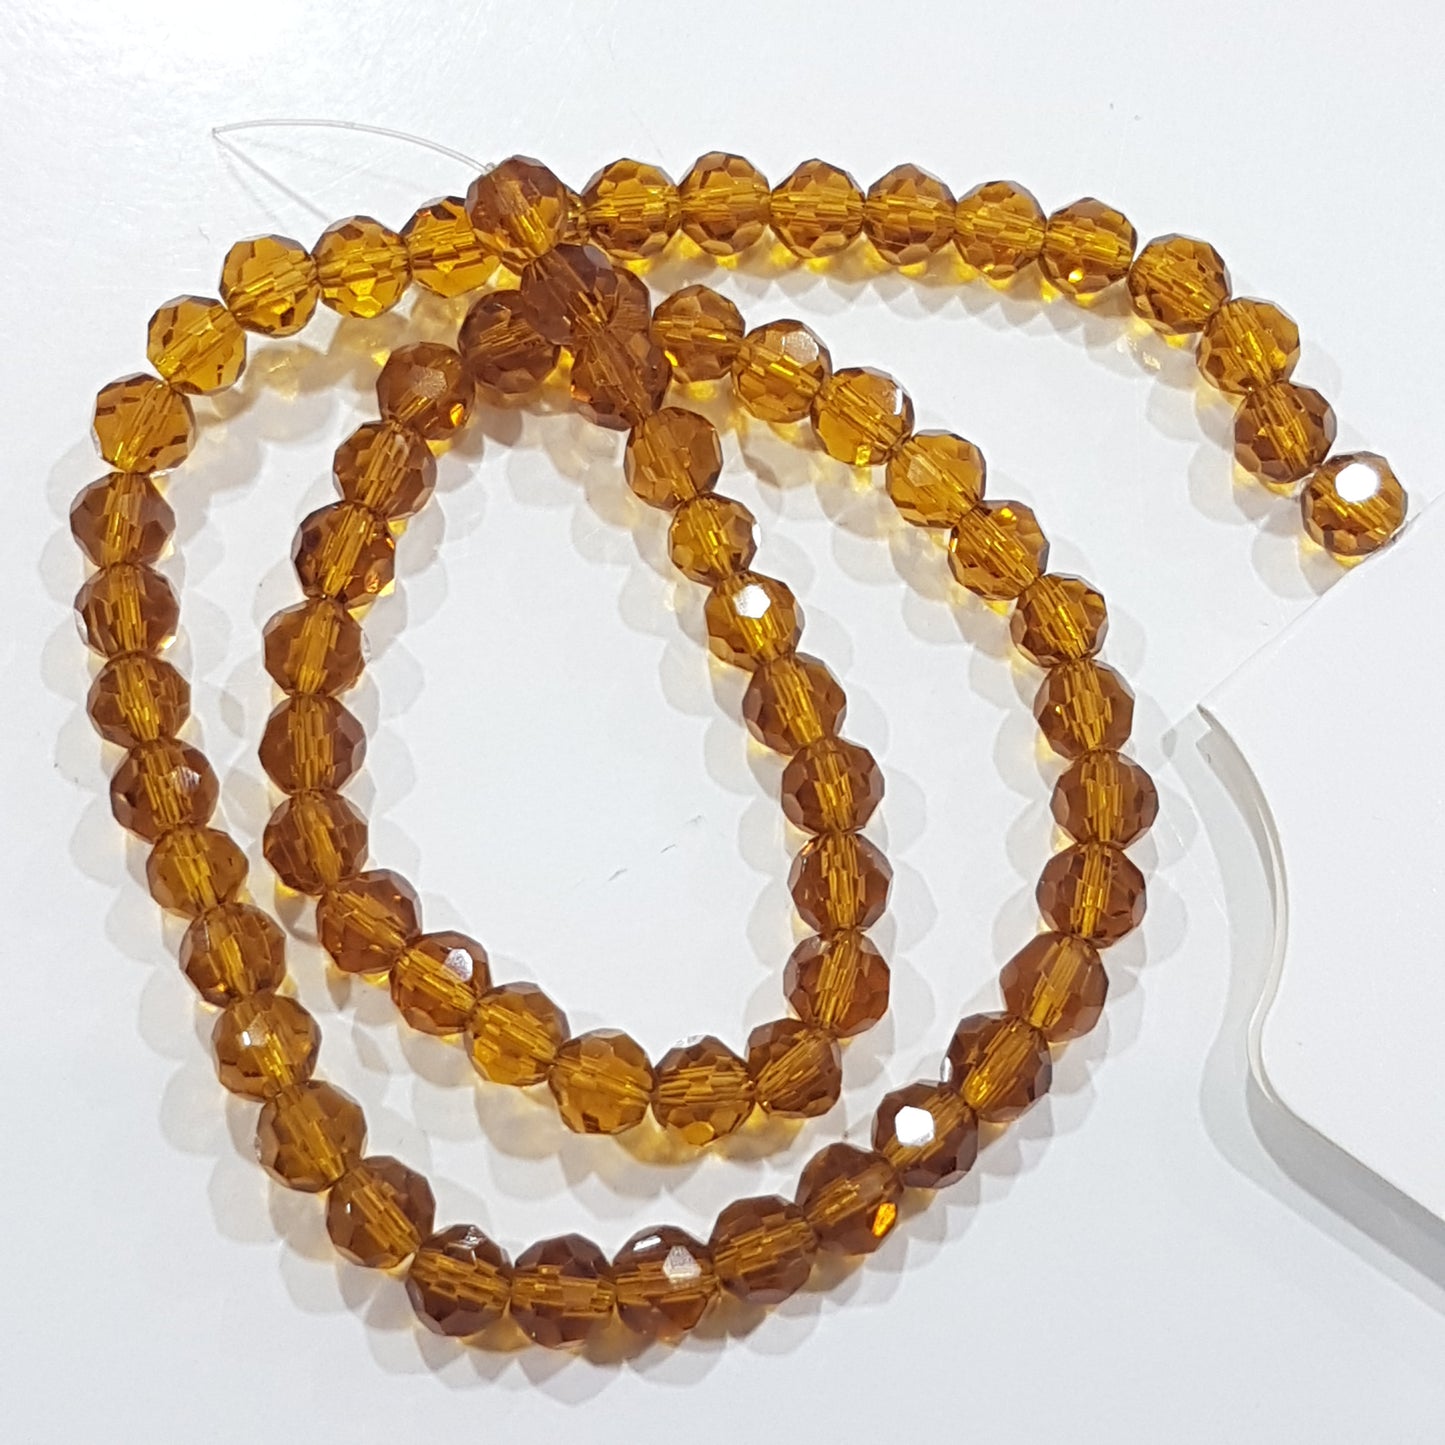 5mm Amber Faceted Glass Beads